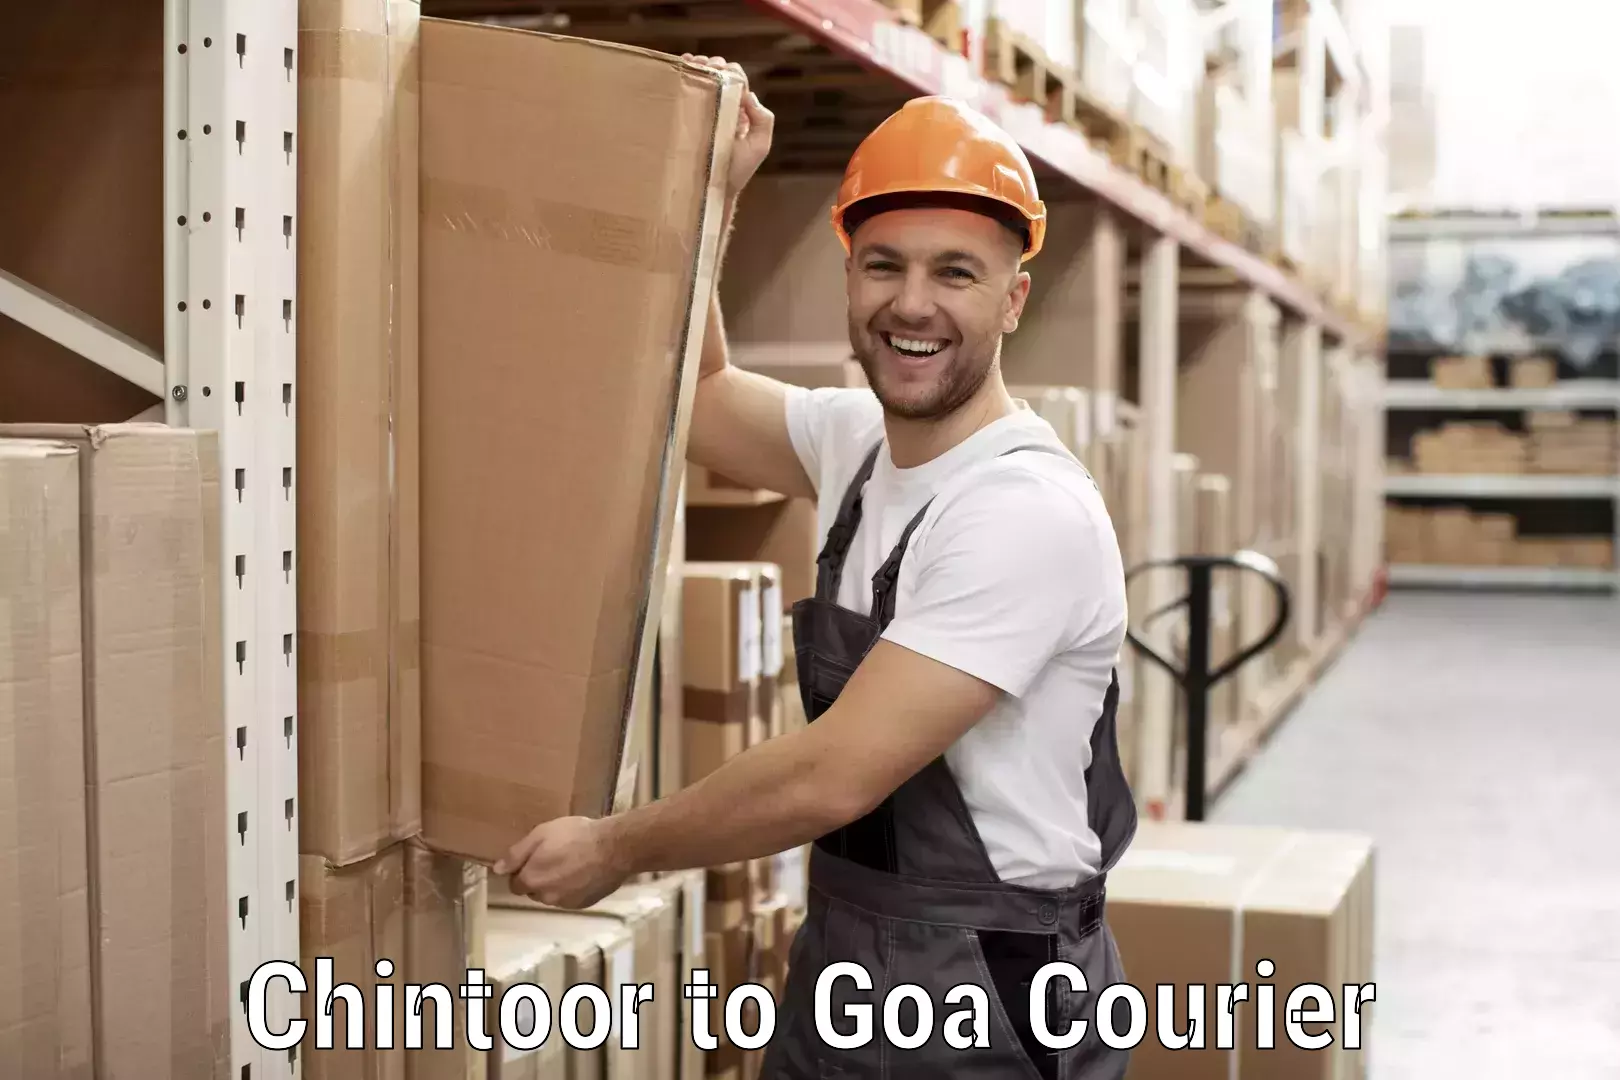 Express delivery solutions Chintoor to Vasco da Gama